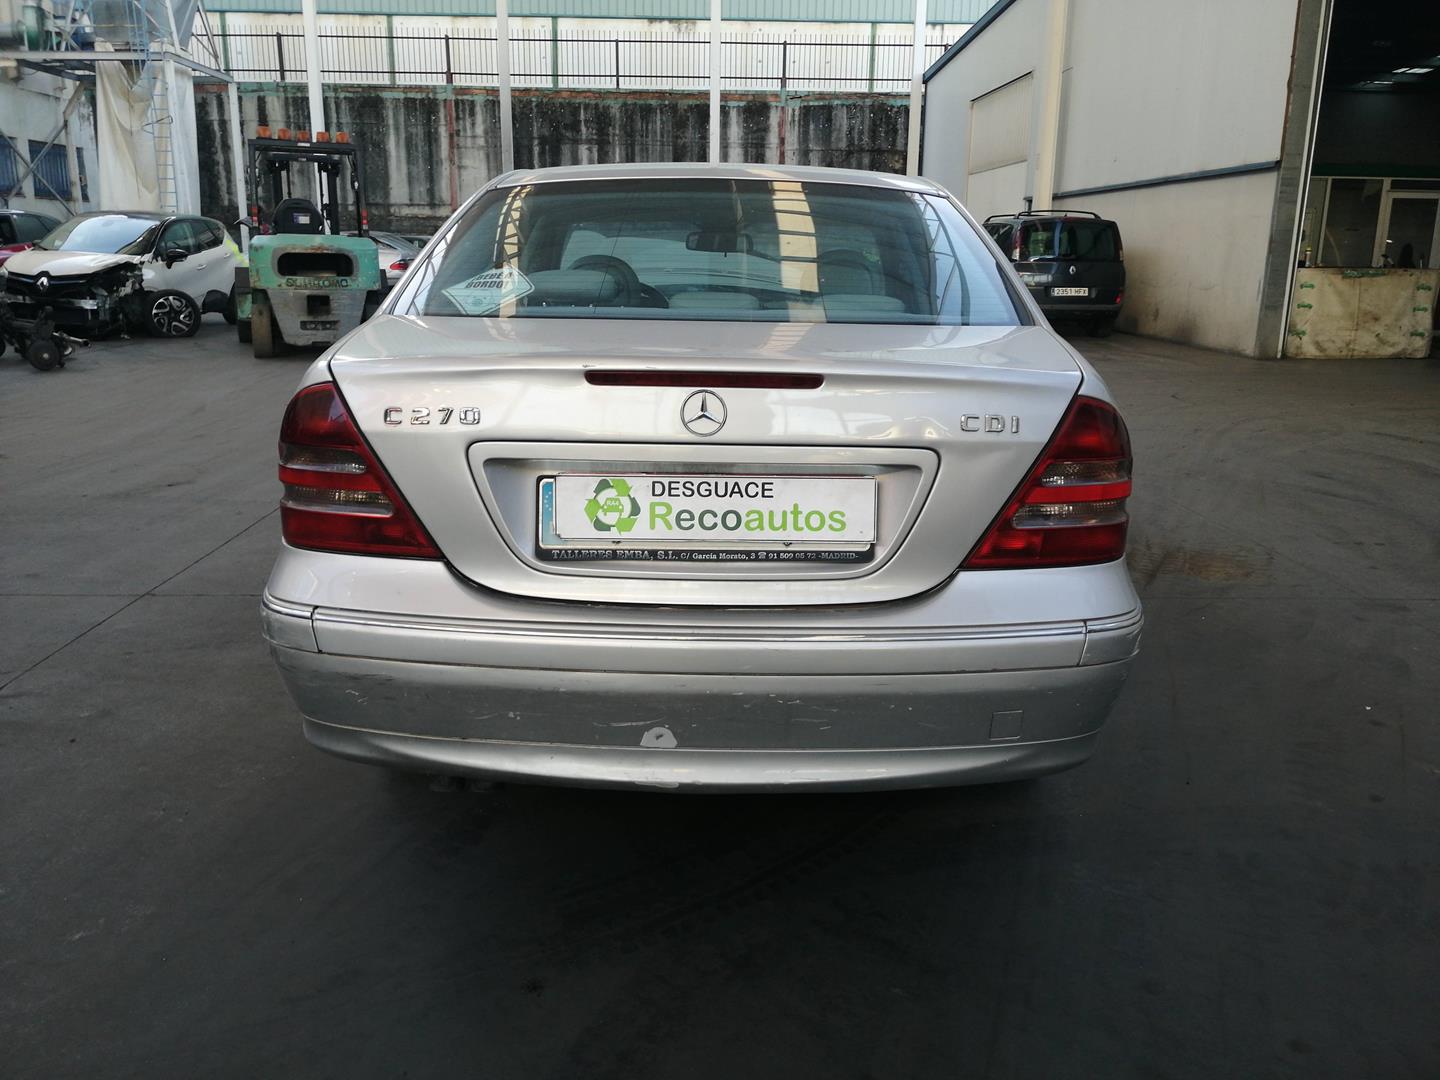 MERCEDES-BENZ C-Class W203/S203/CL203 (2000-2008) Other Control Units 2038206326 21728819